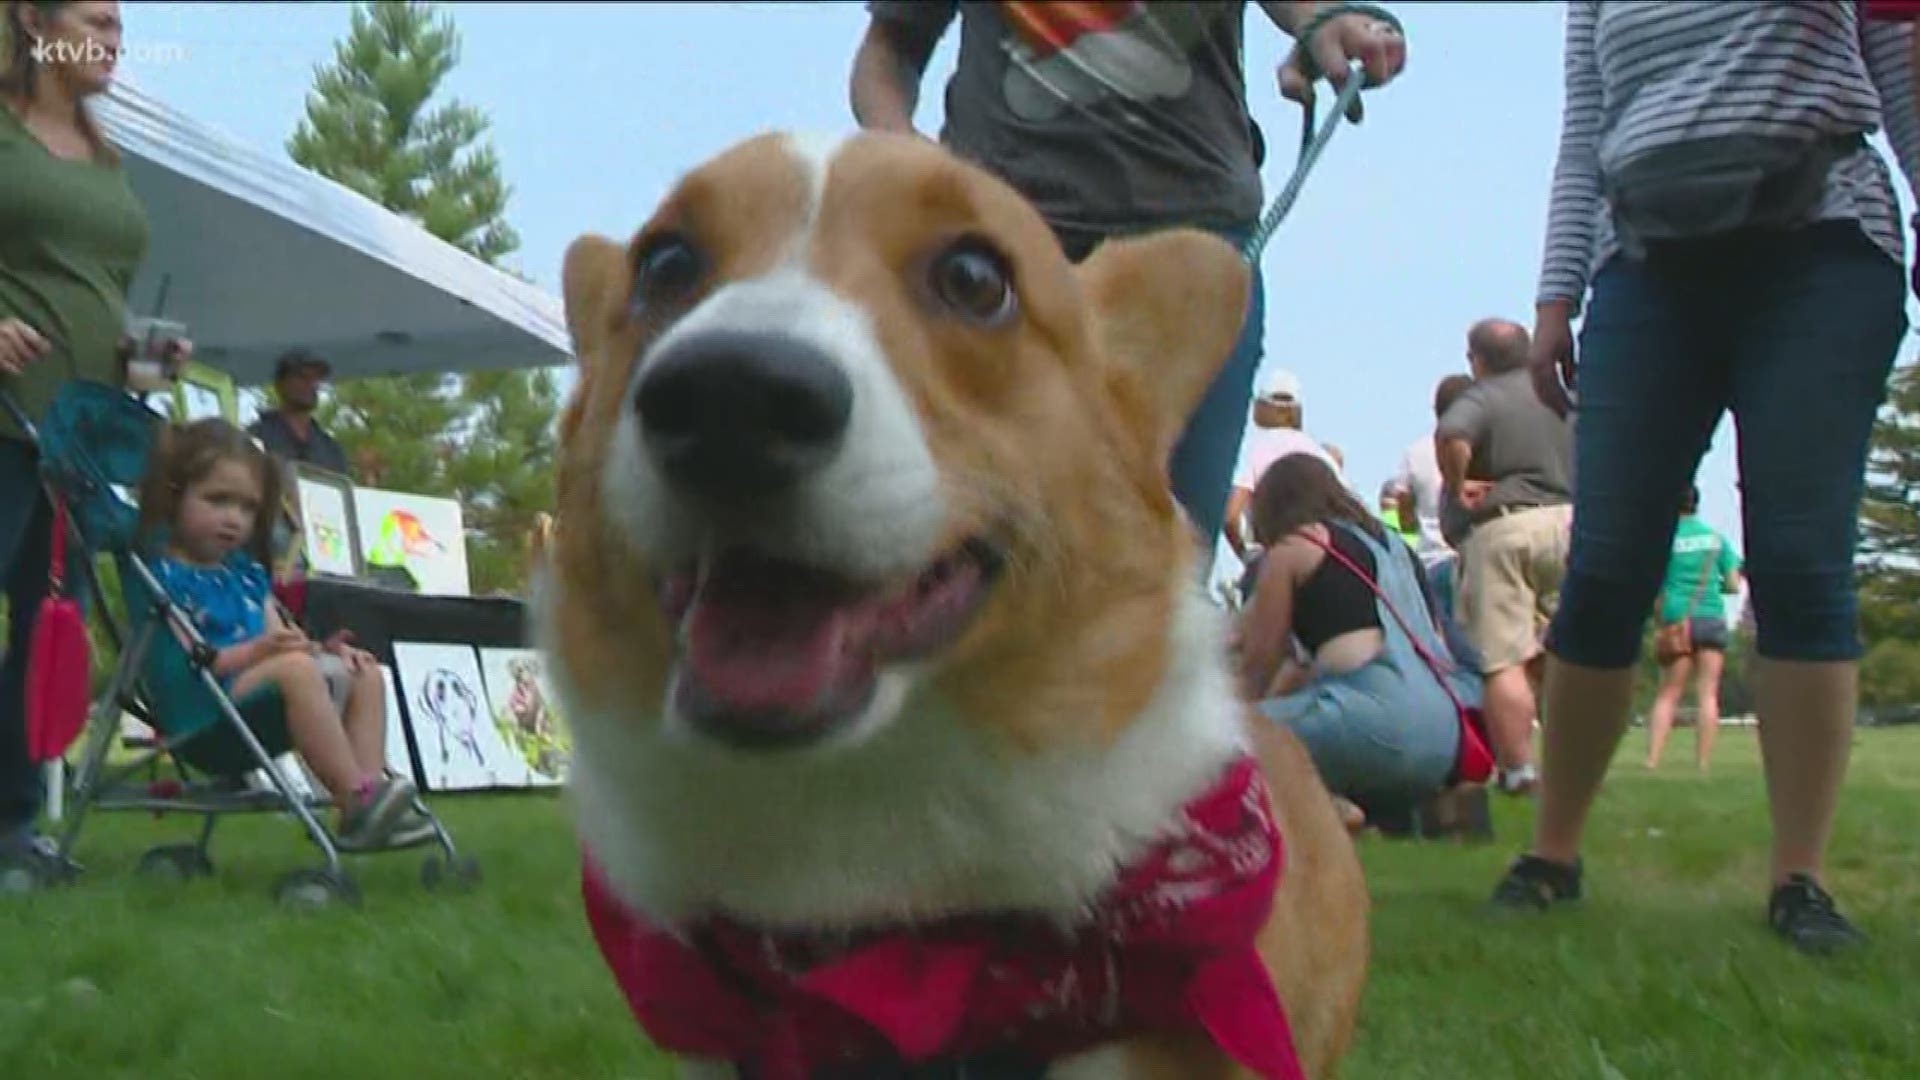 Boise's first-ever Corgi Fest took place on Saturday, August 18 - with a pup parade, costume contest, Corgi Derby and more -- benefitting Idaho Humane Society and Fuzzy Paws Rescue.